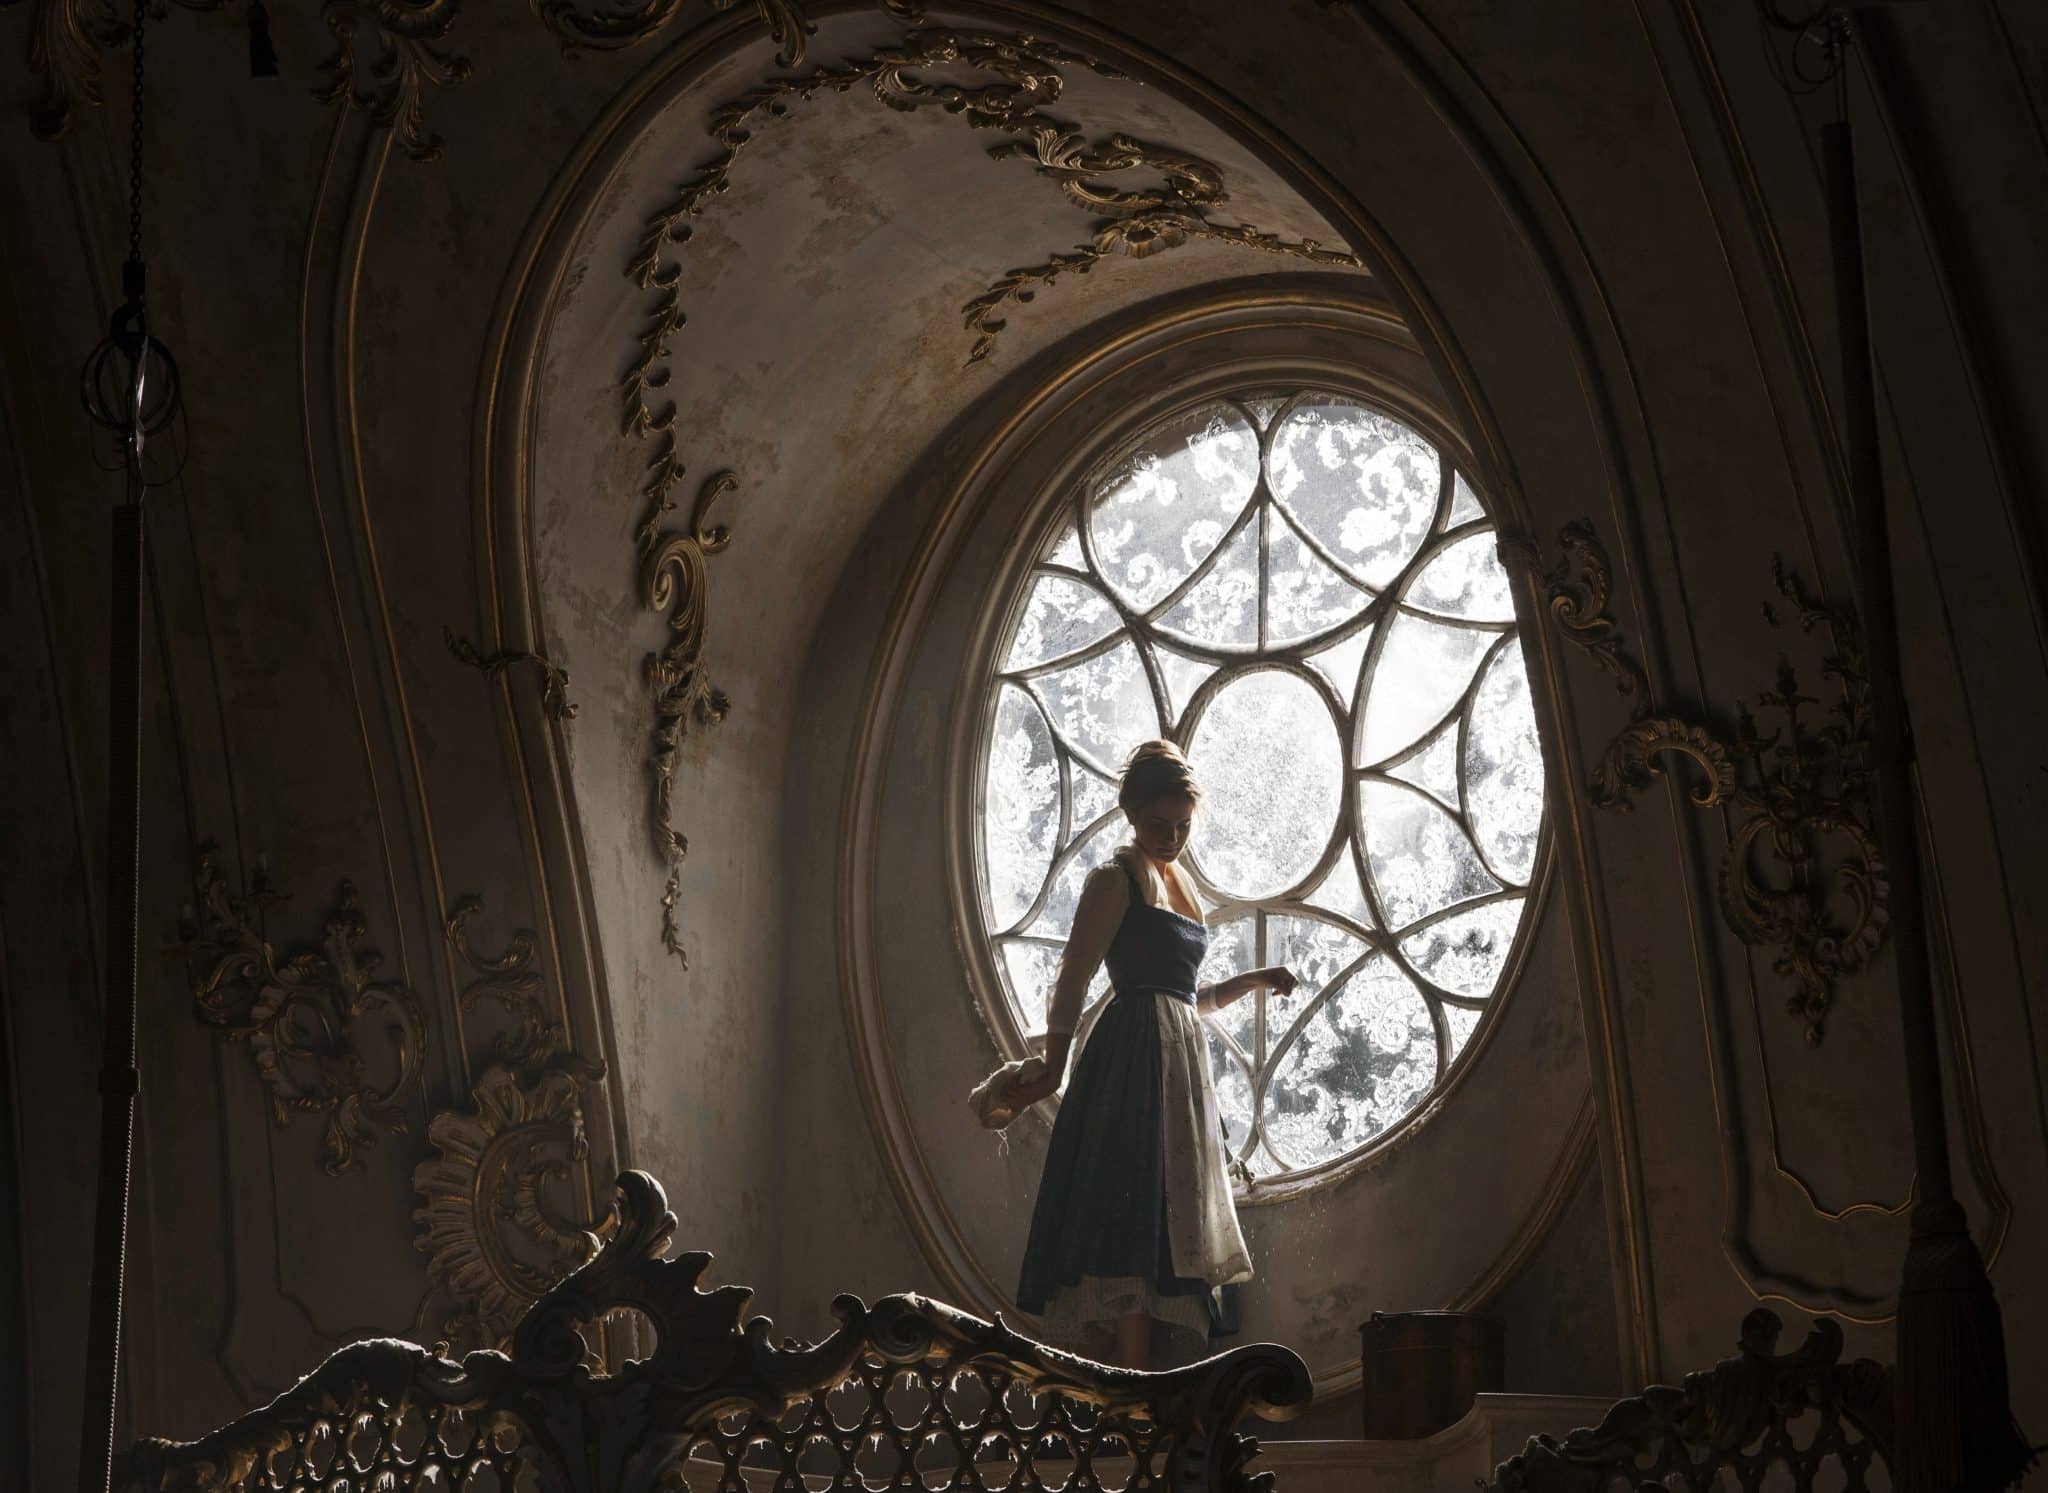 BEAUTY AND THE BEAST - New Trailer and Images! #BeOurGuest #BeautyAndTheBeast